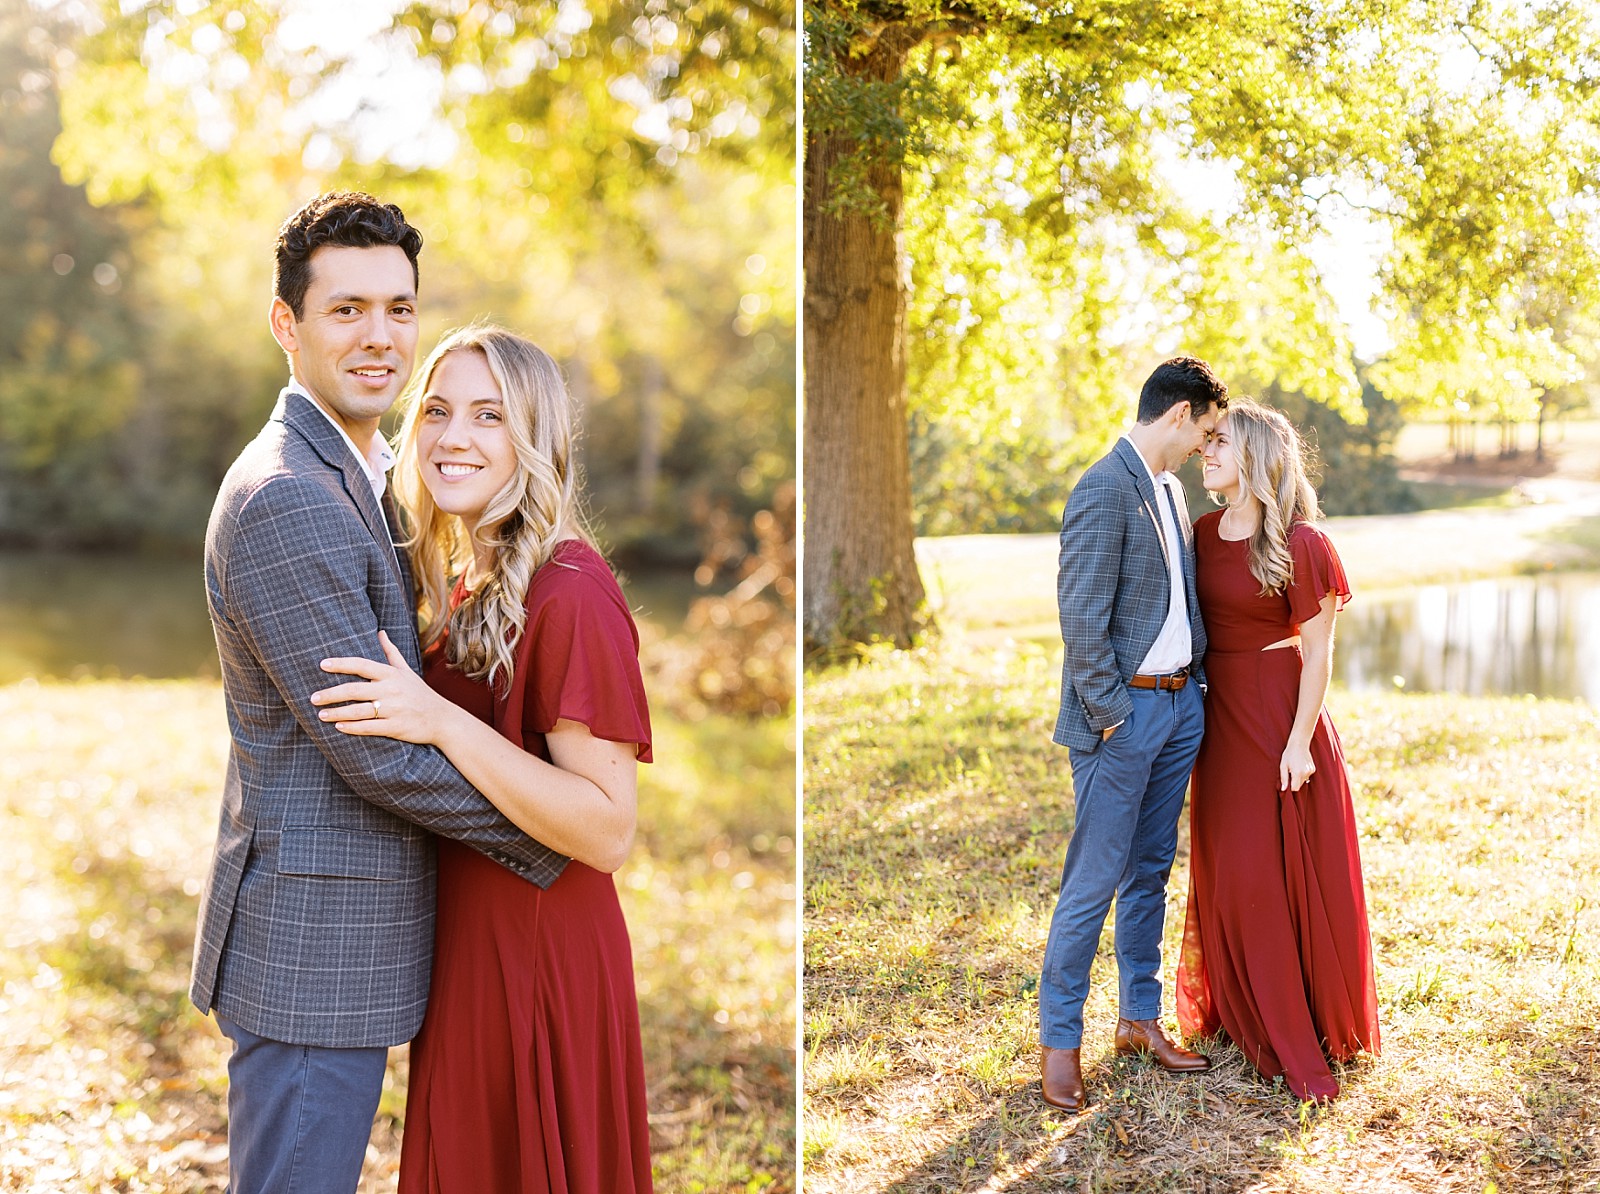 Fall engagement outfit inspiration | Joyner Park fall engagement session | Raleigh NC wedding photographer